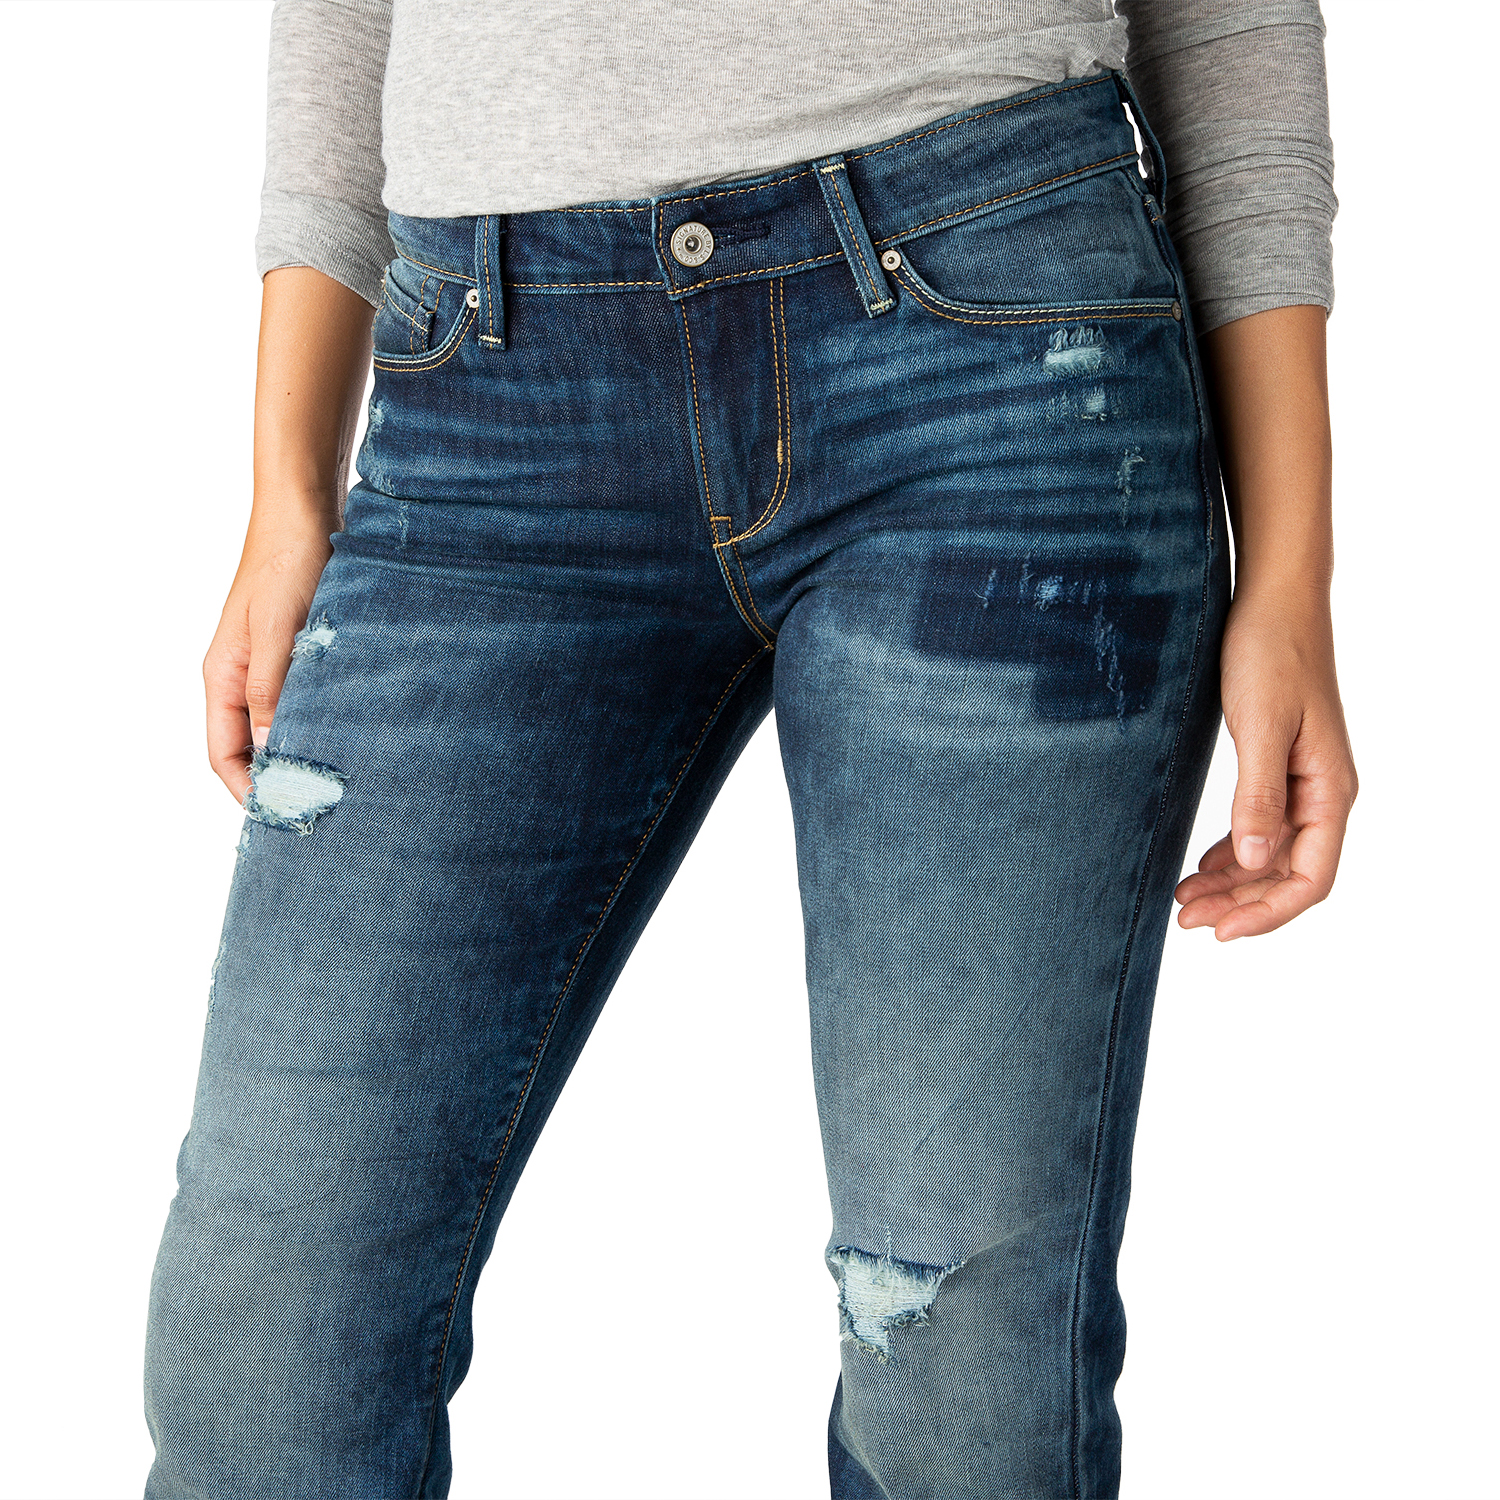 Signature by Levi Strauss & Co. Women's Modern Slim Cuffed Jeans - image 3 of 4